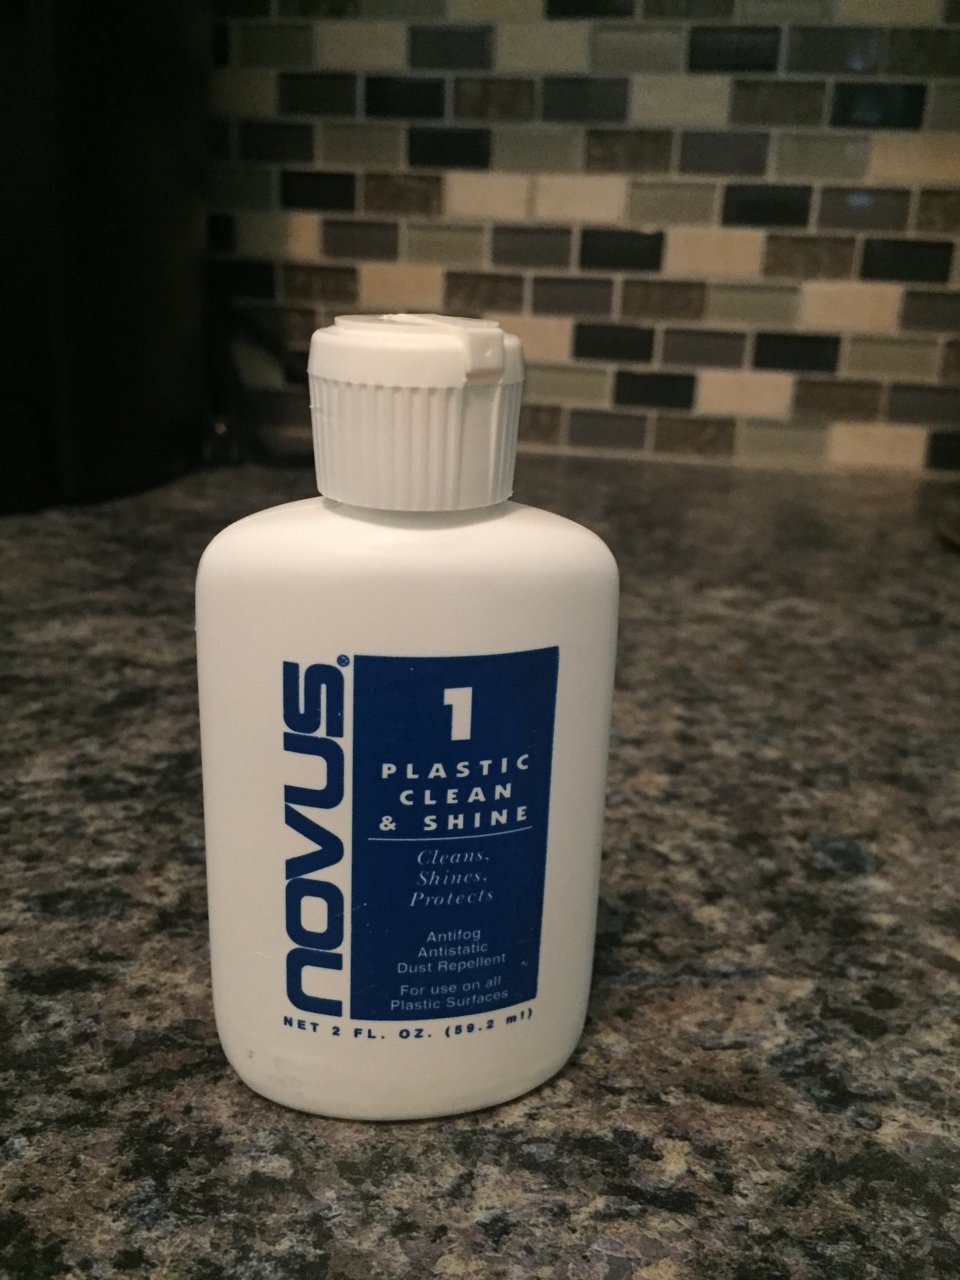 Novus PN-7020 Plastic Clean & Shine #1 - Cleaner and Polish for